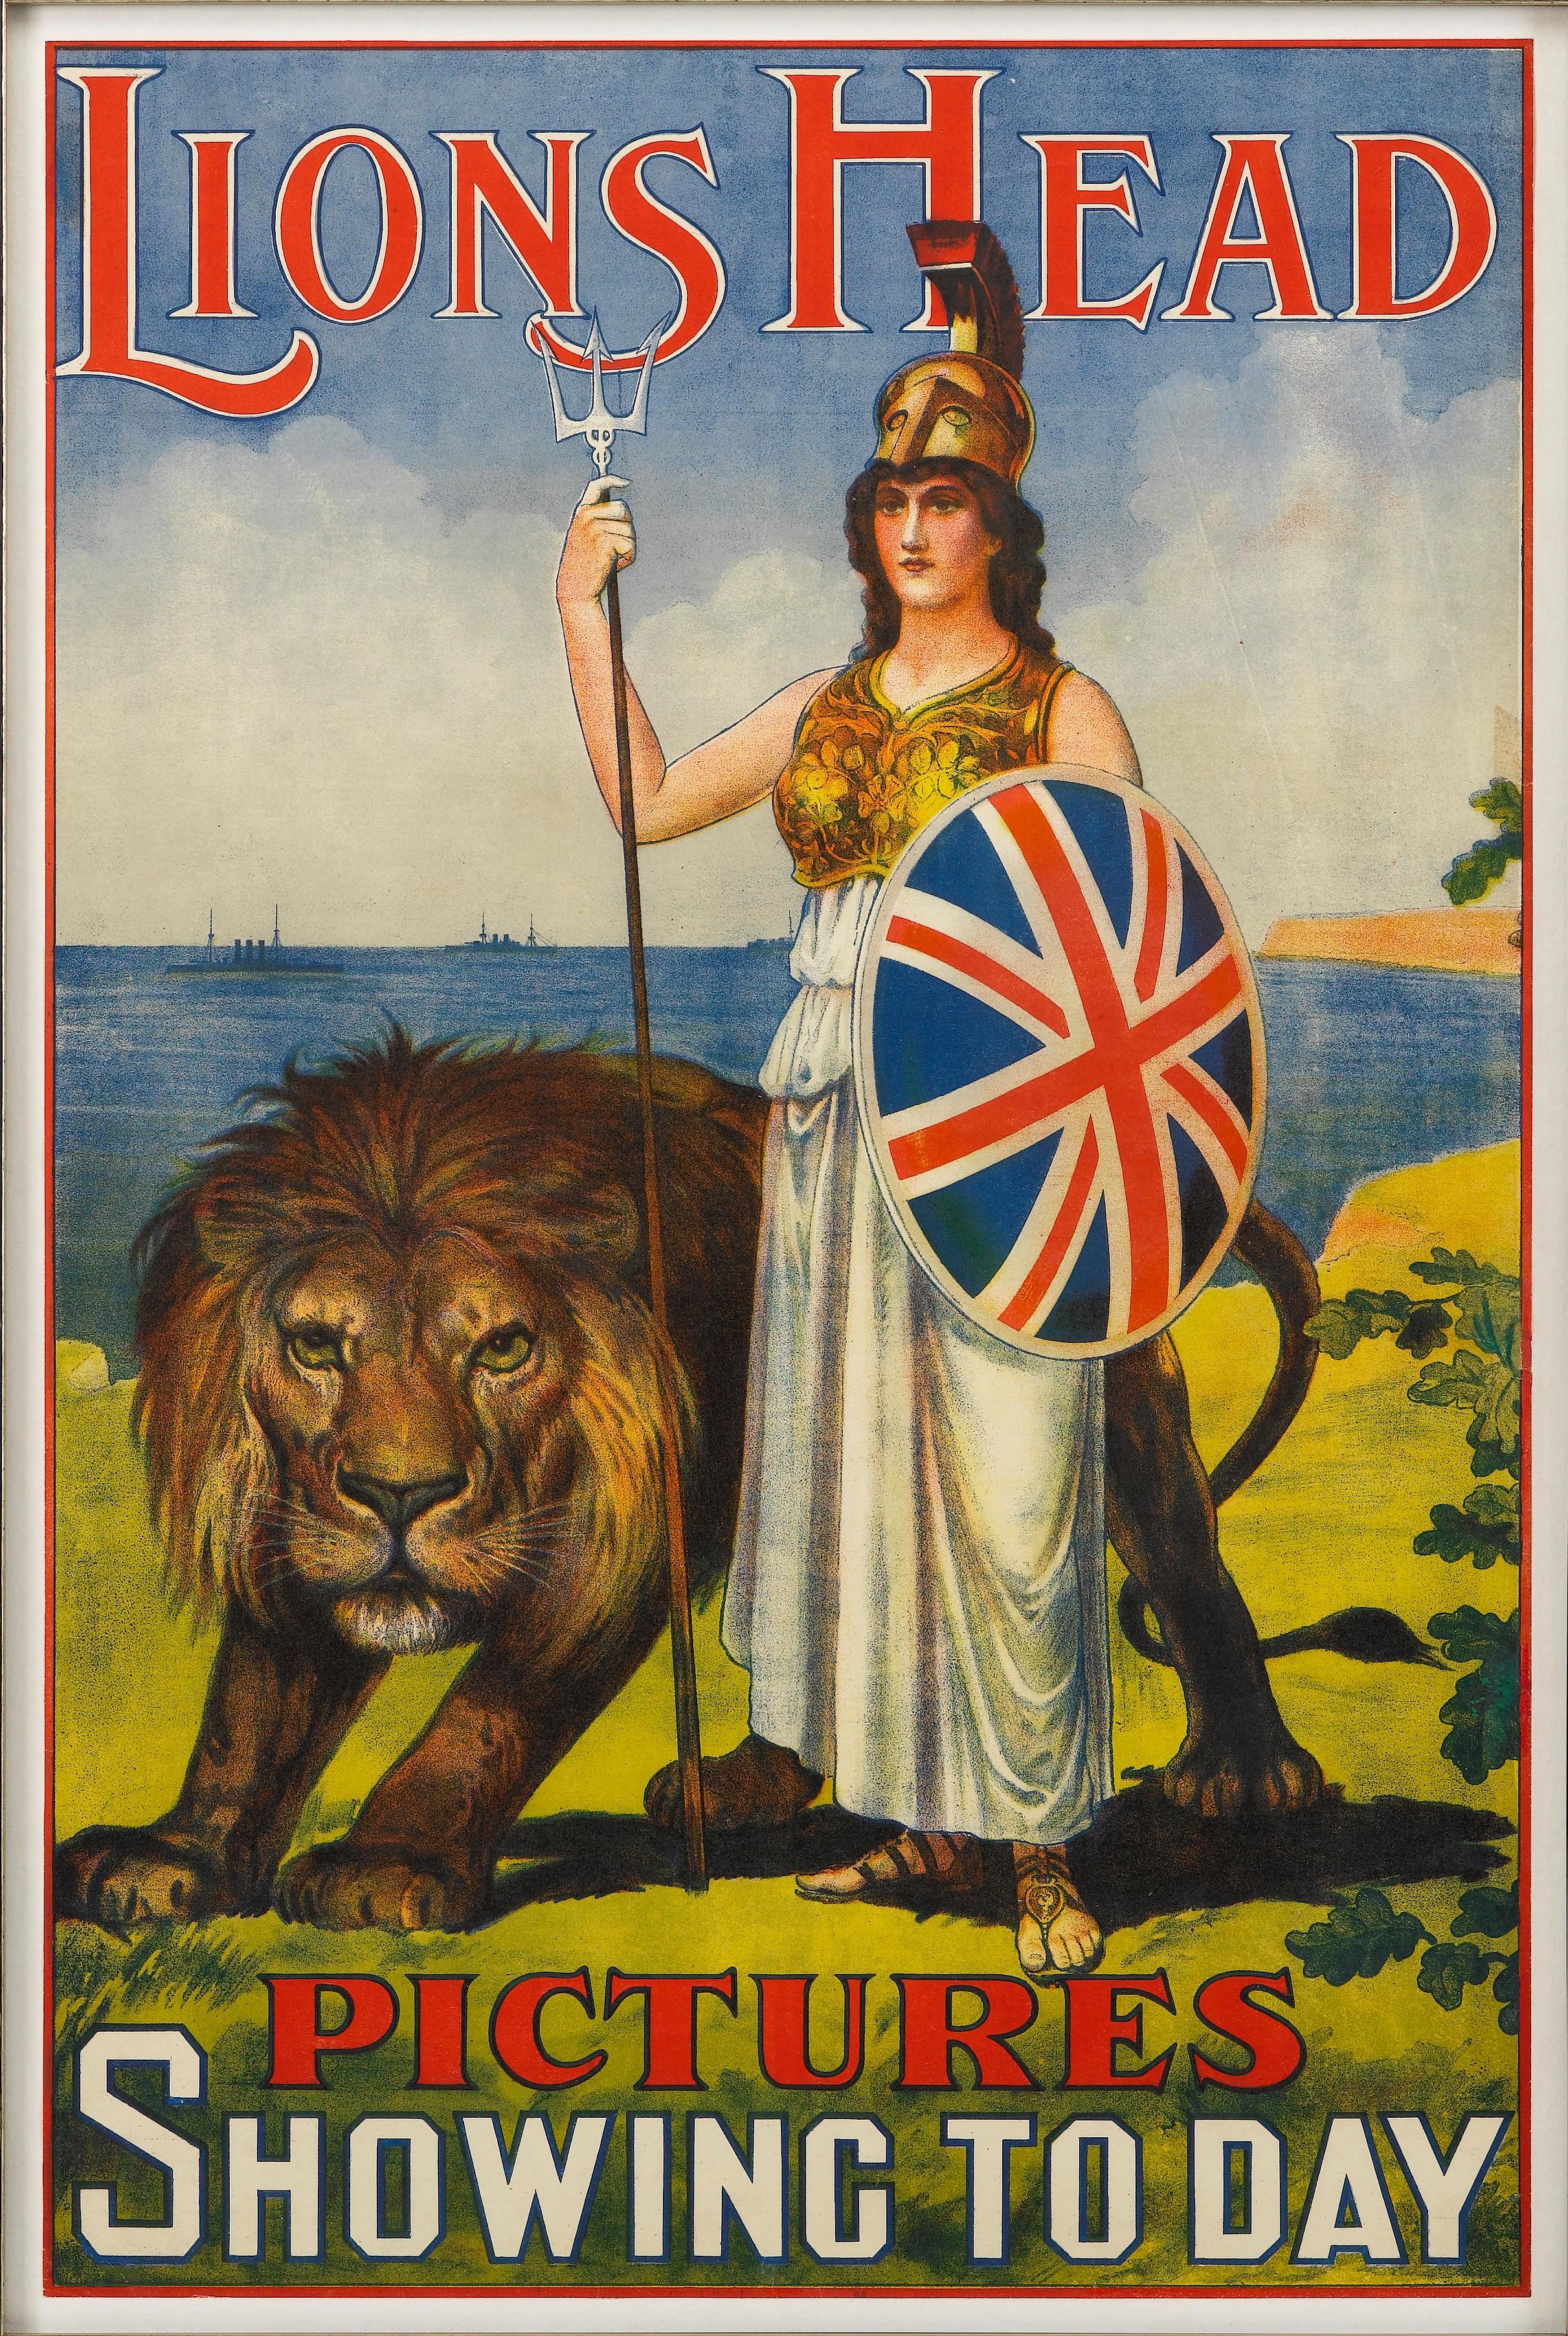 This is a beautiful, original advertisement poster for Lions Head Pictures. The poster dates to circa 1911. The poster was designed by an unknown artist.

The poster depicts Britannia, a female depiction of the British Isles. Here she is illustrated